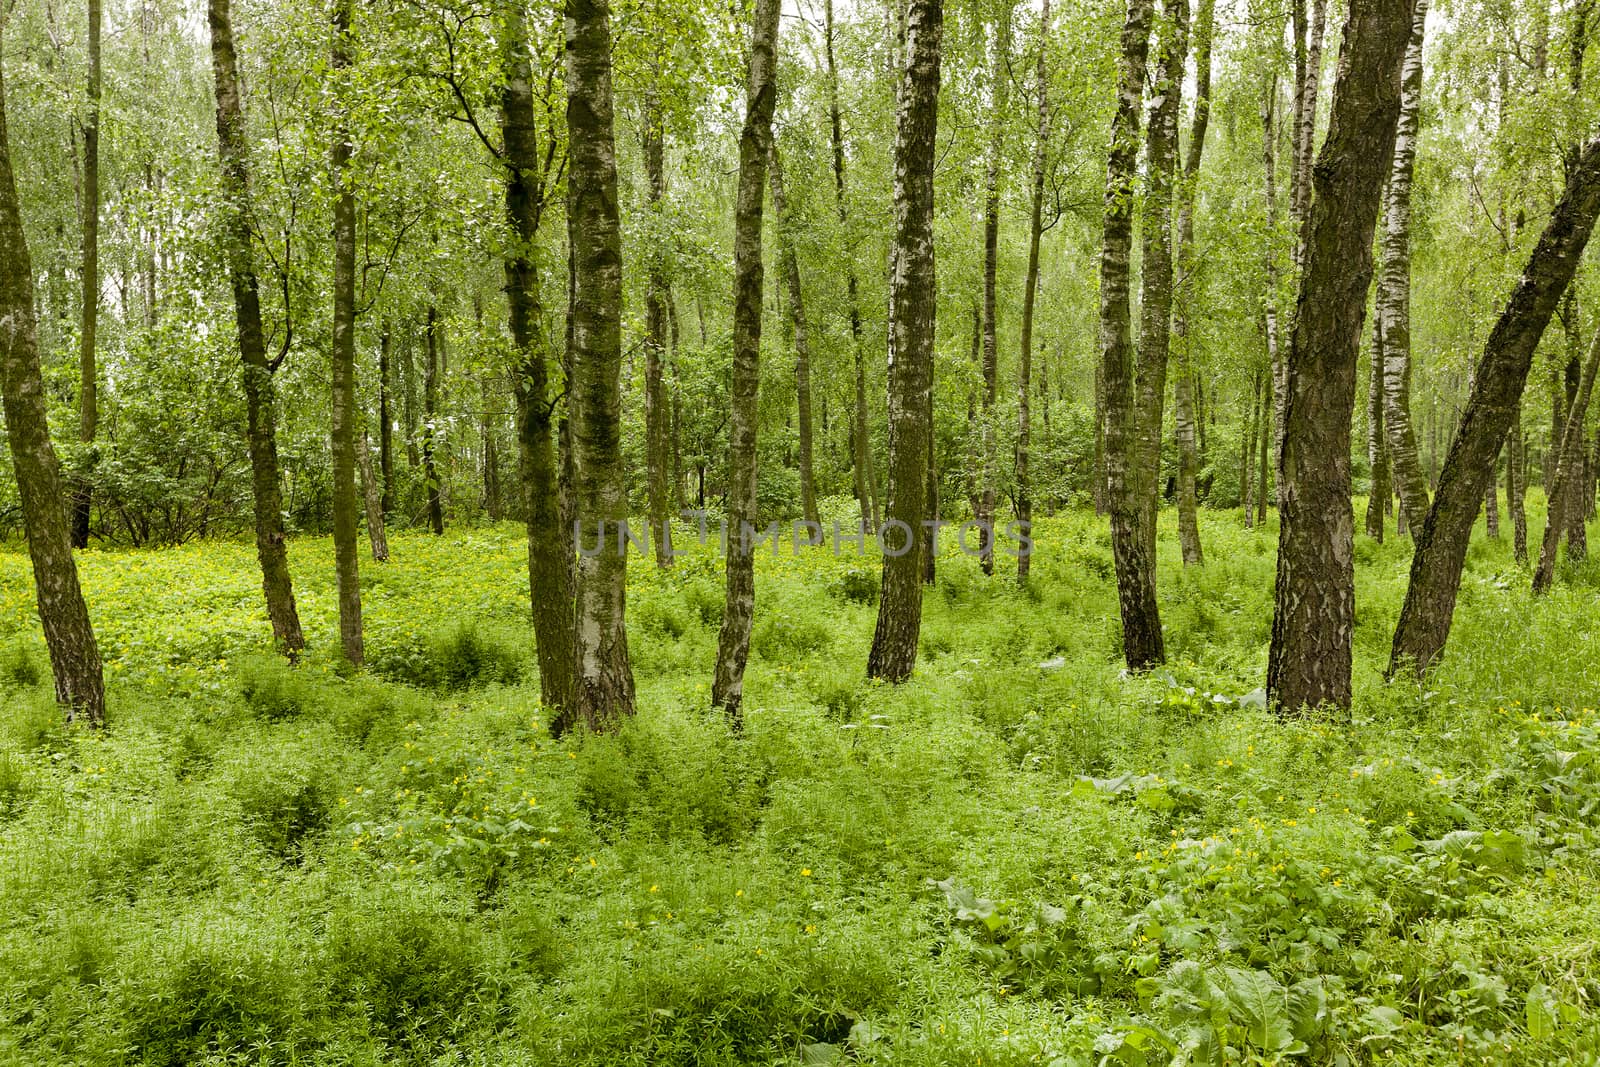   the trees growing in the territory of a bog. spring season